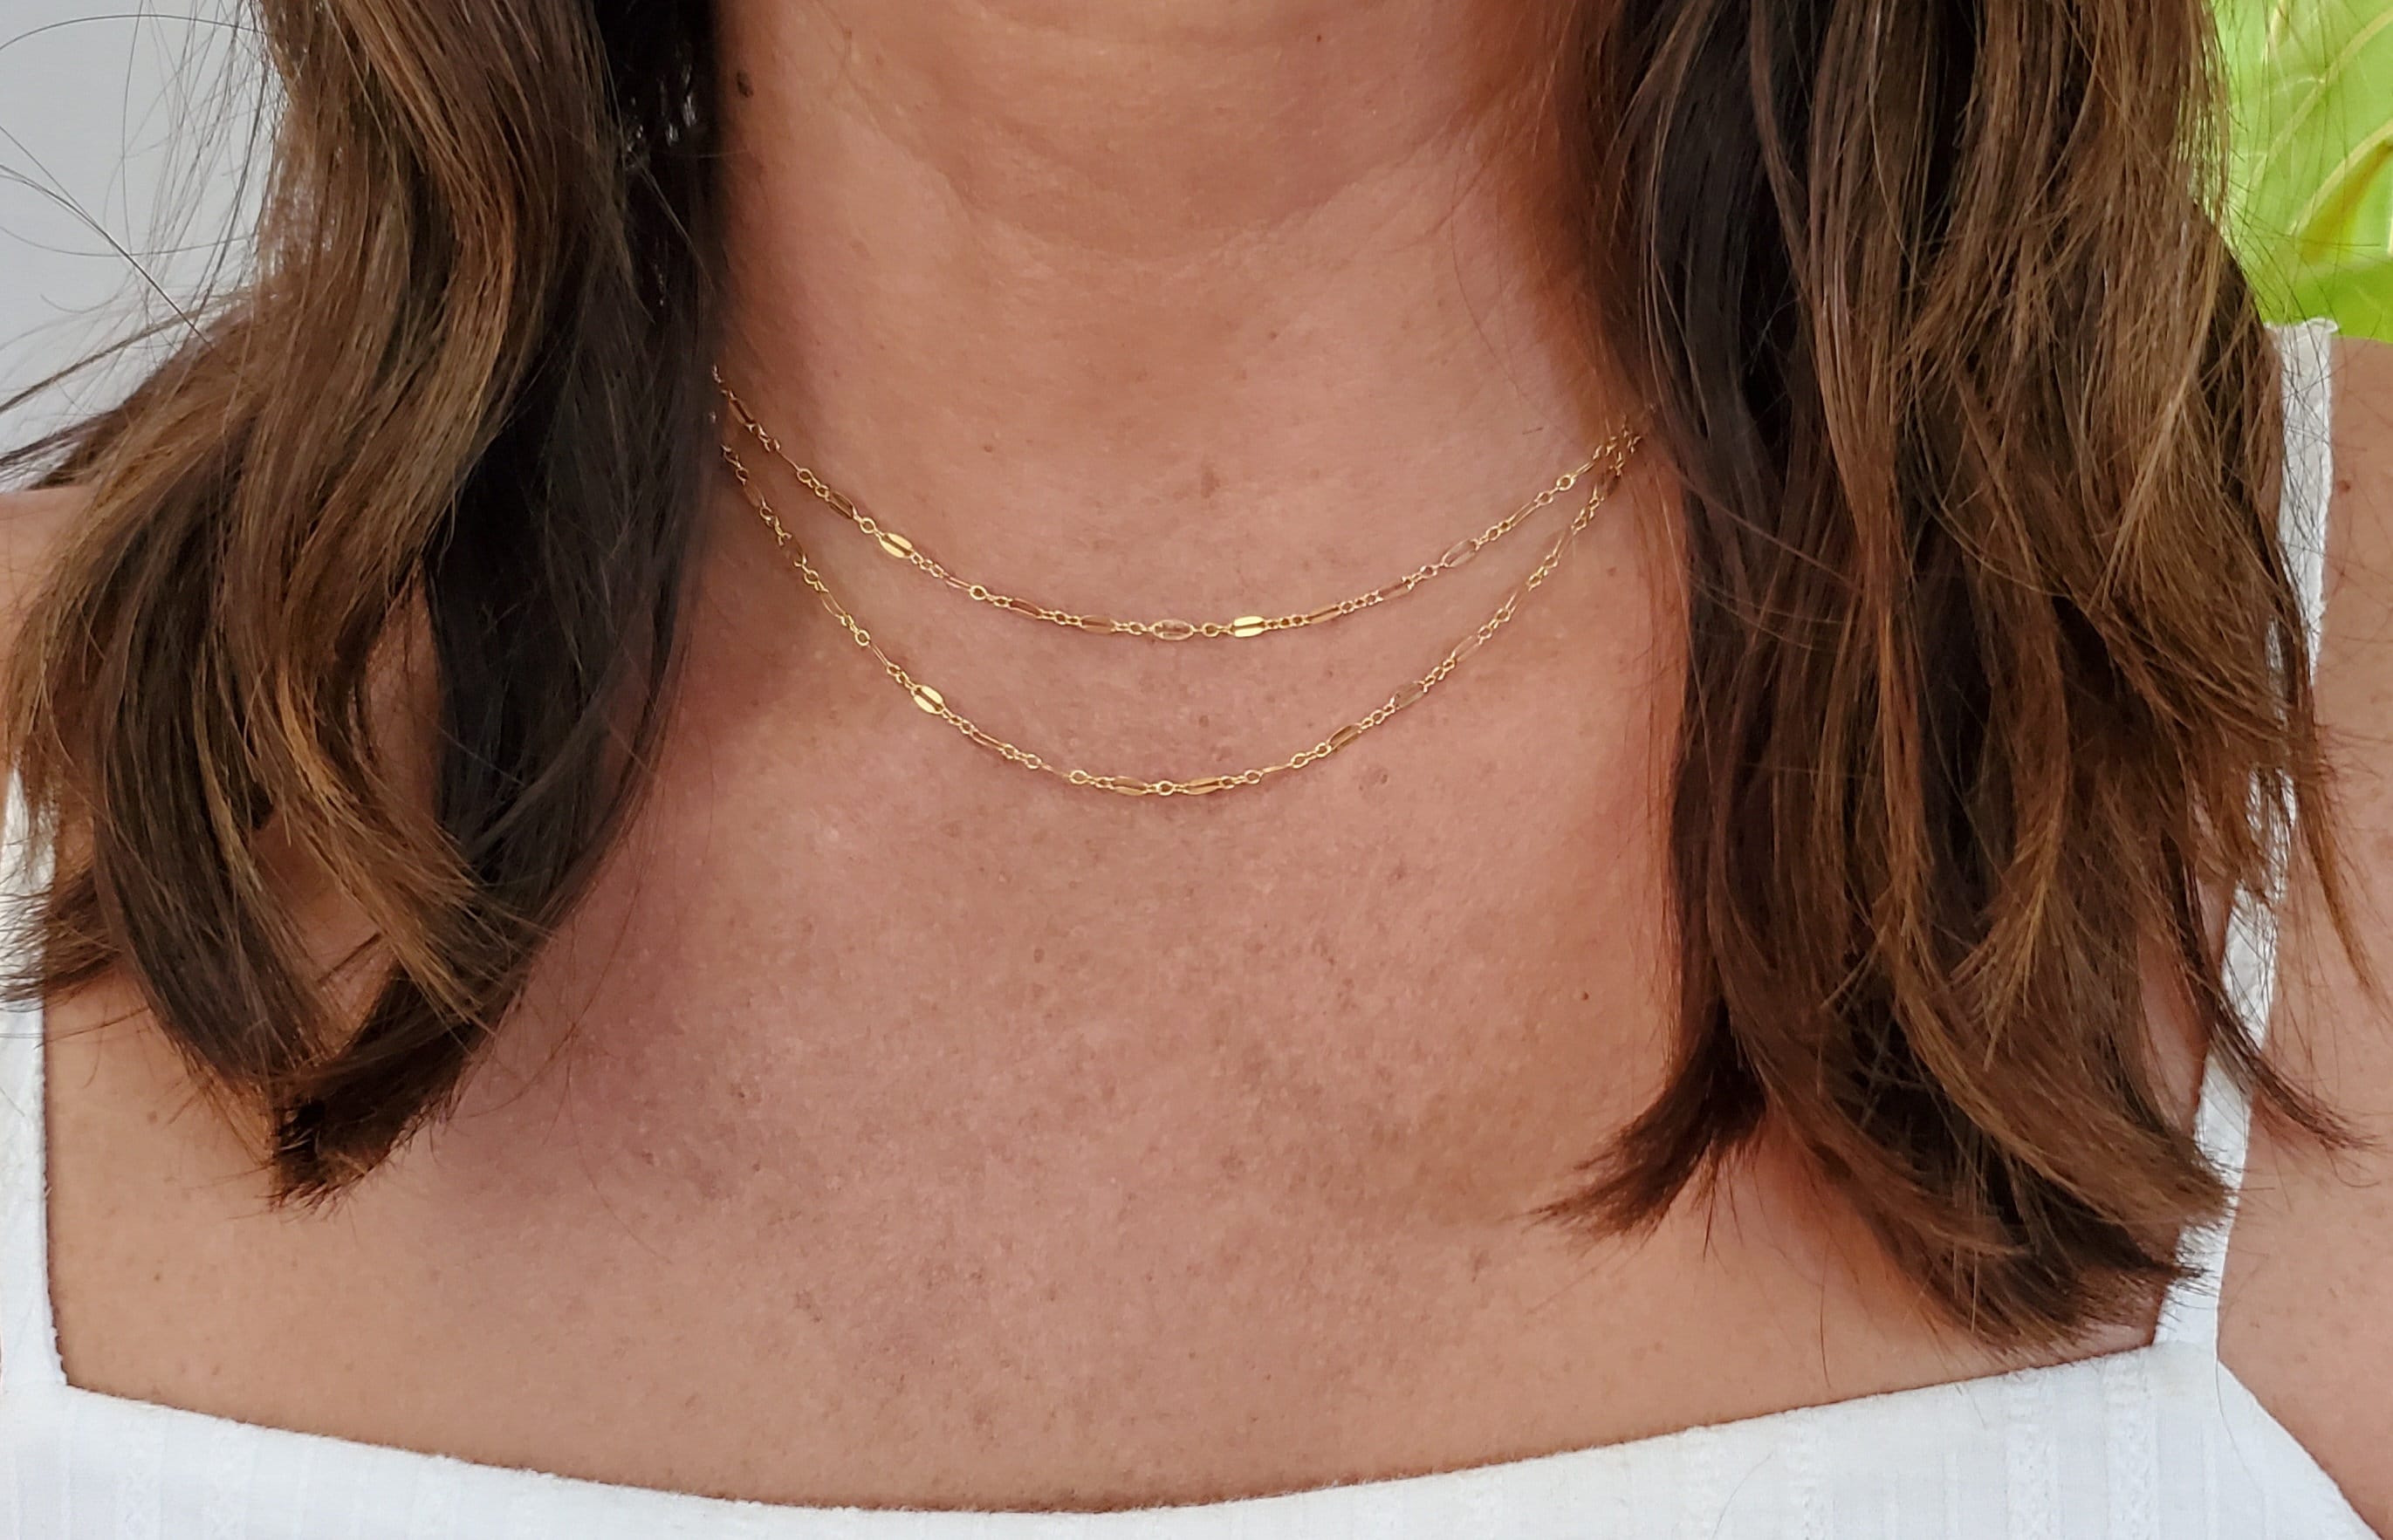 Double Necklace Set, Set of 2, Gold, Silver, Two Necklaces, Layering  Necklaces, Necklace Set, Layered Set, Delicate, Dainty, Minimalist 